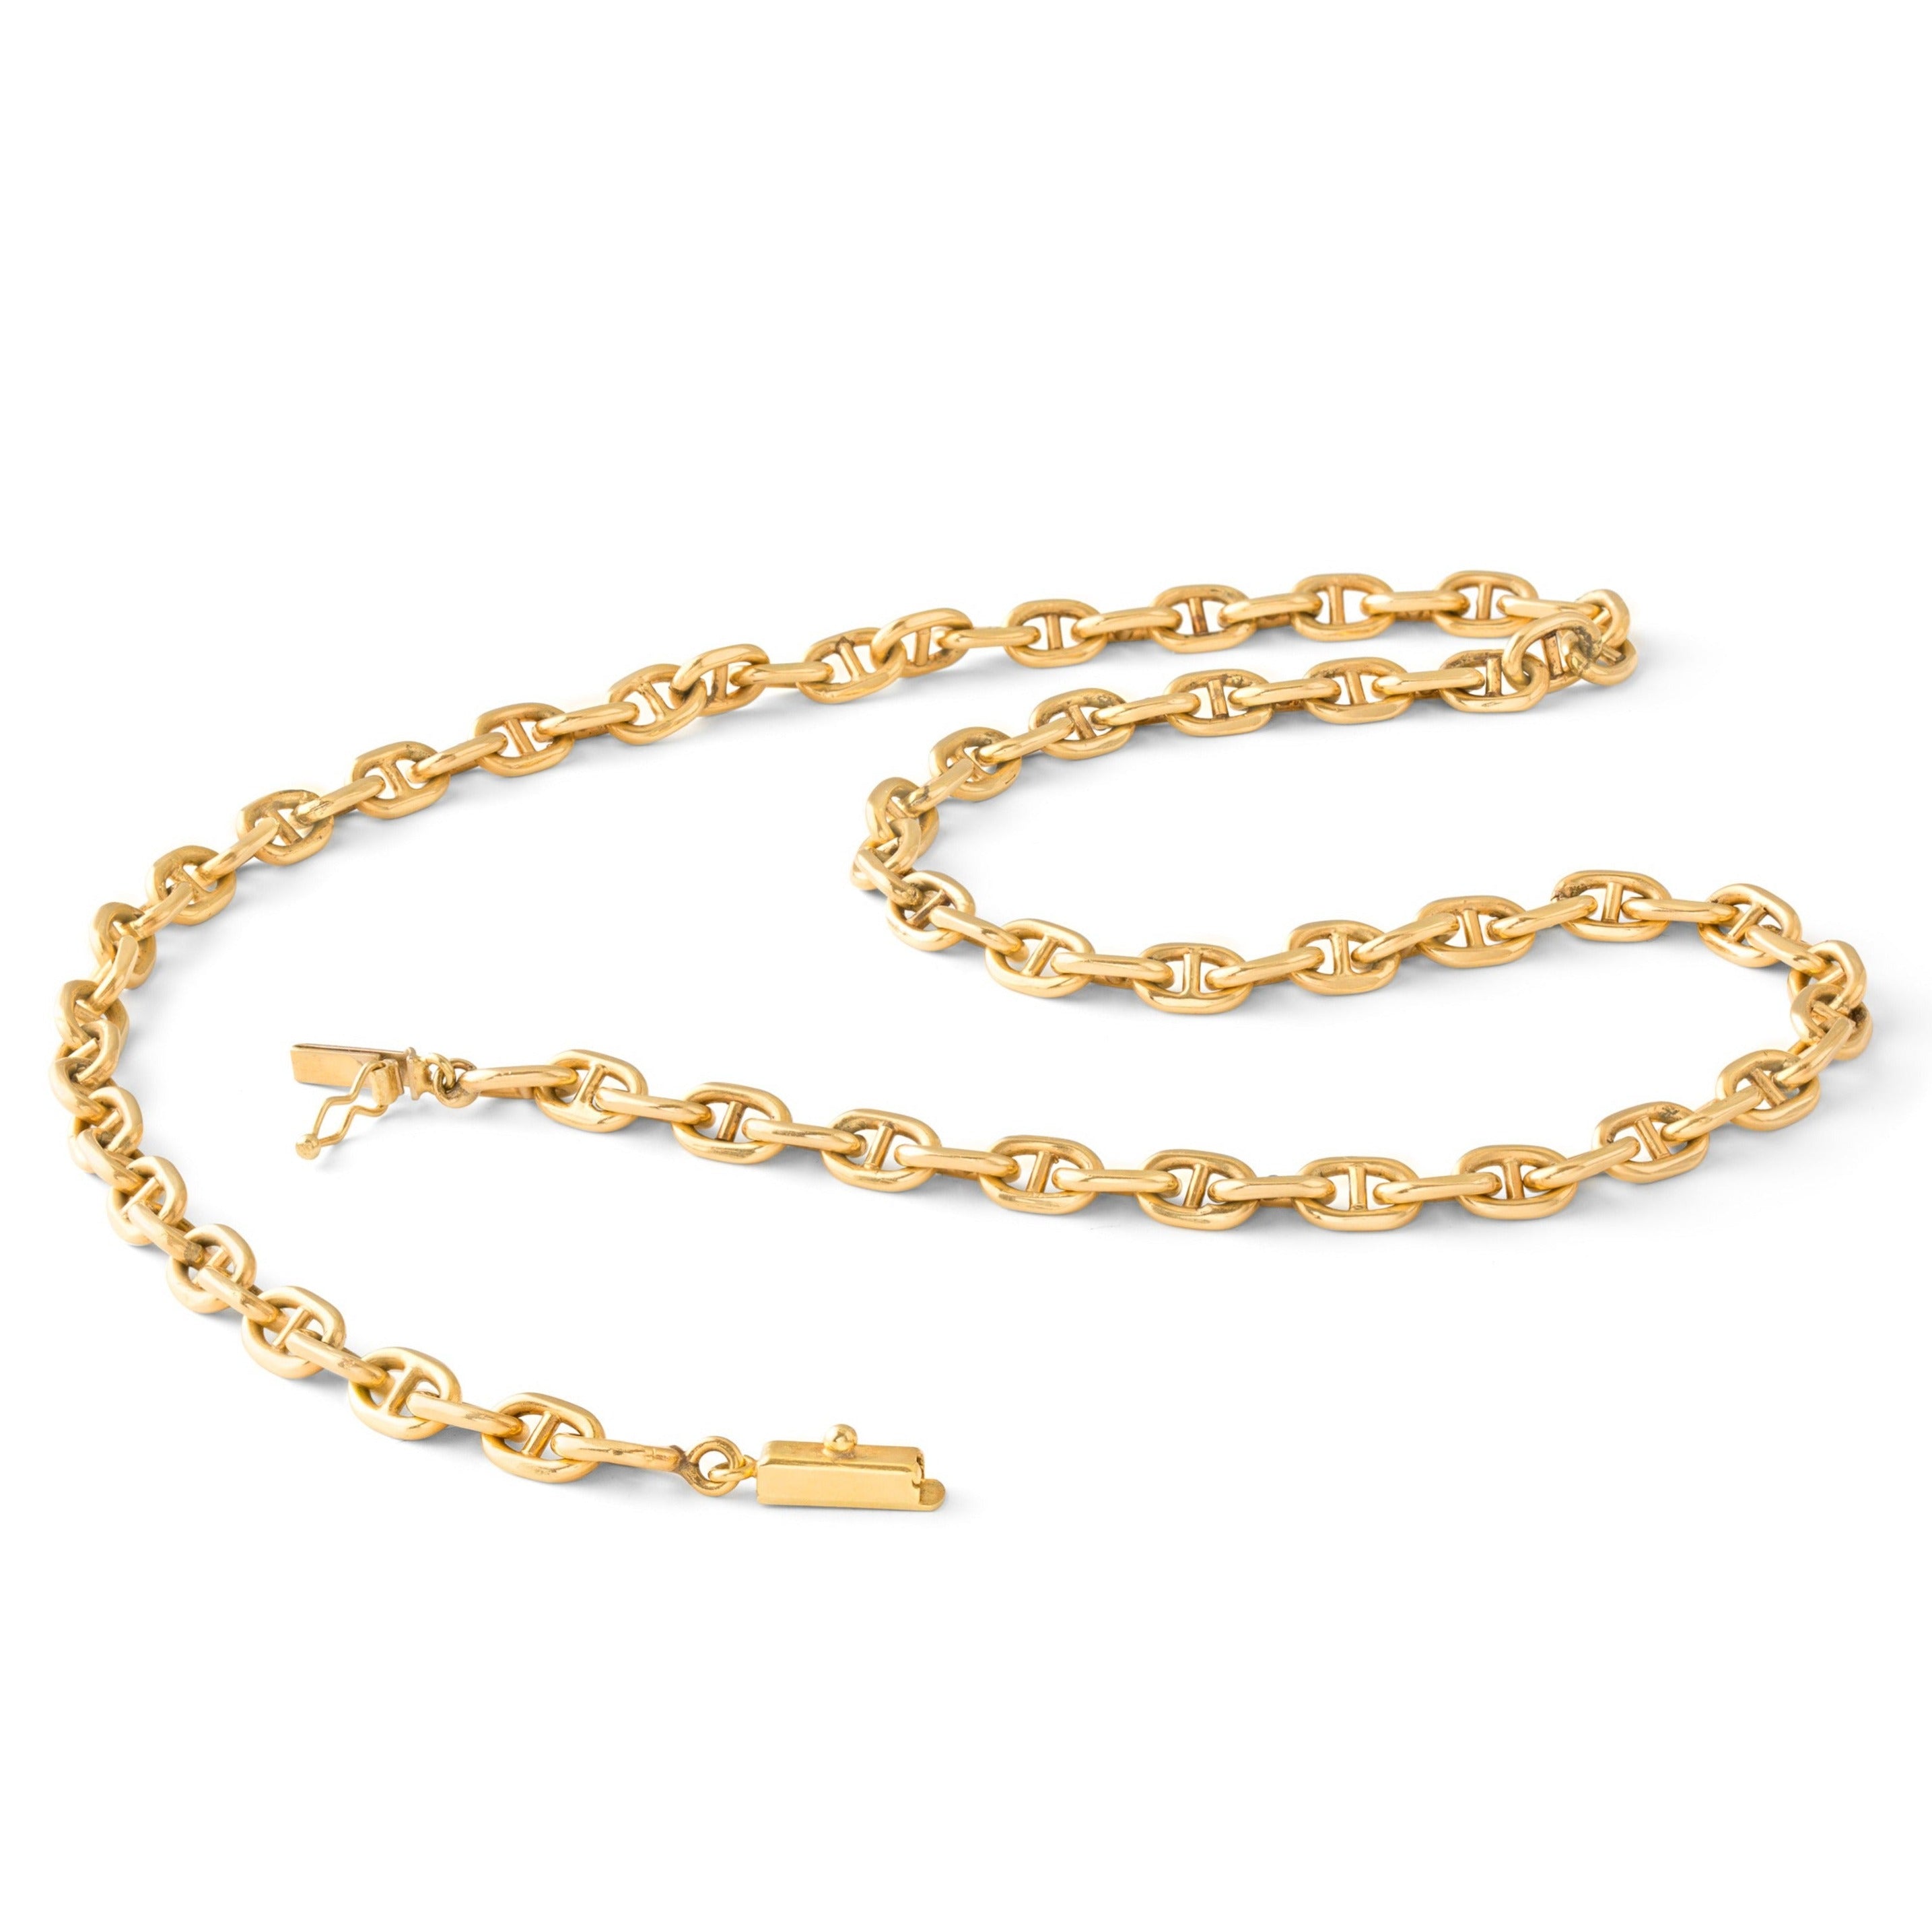 Italian Mariner Link 14k Gold 21" Chain Necklace